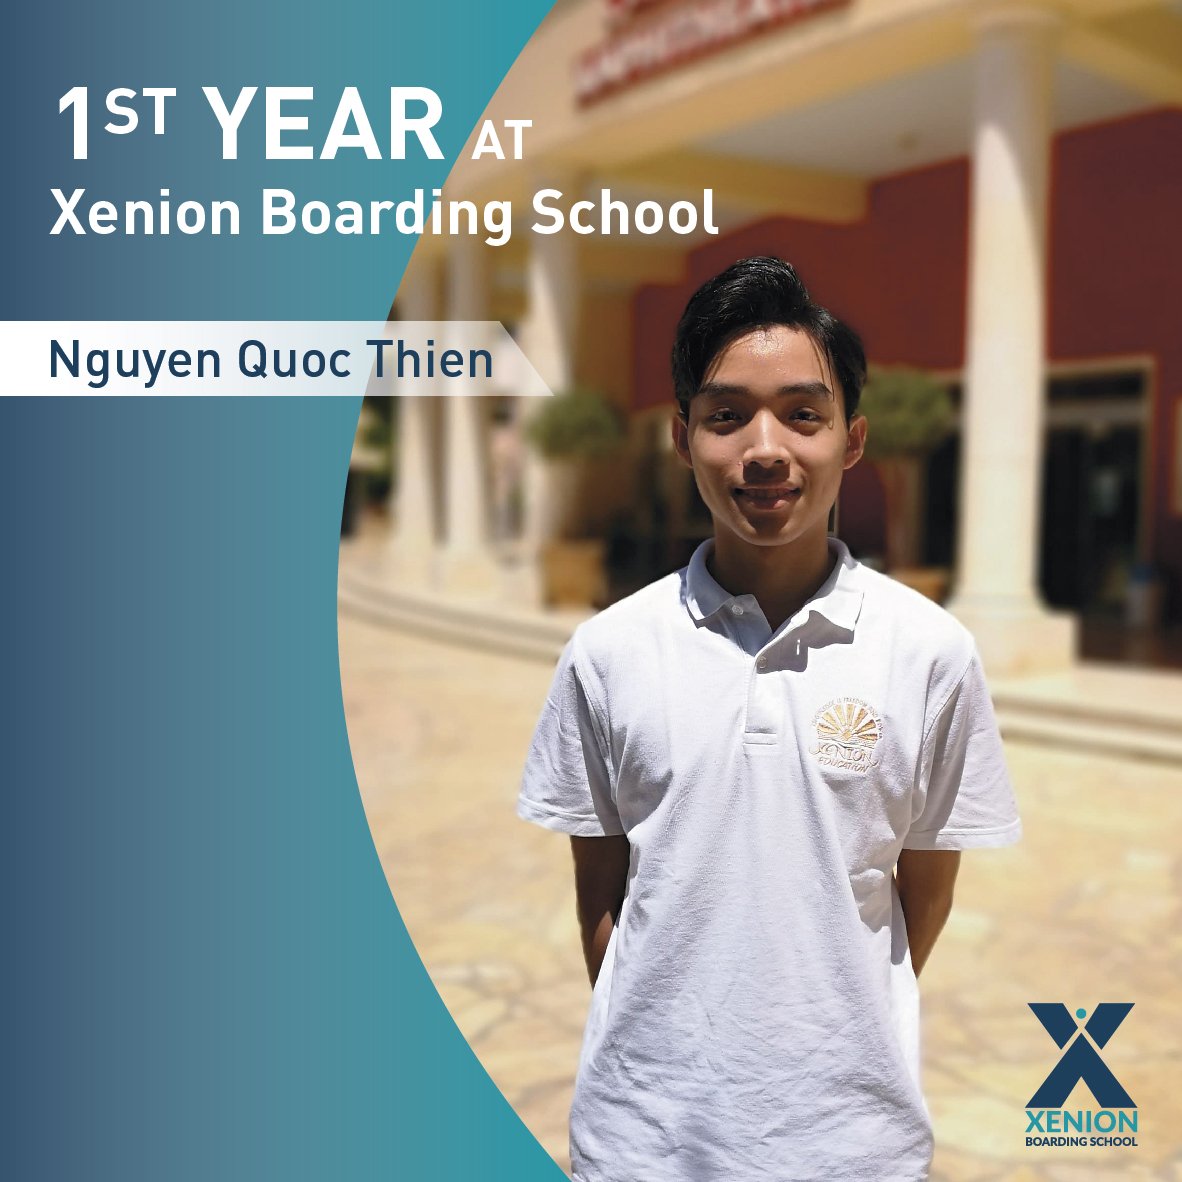 1st year at Xenion Boarding School - Nguyen Quoc Thien